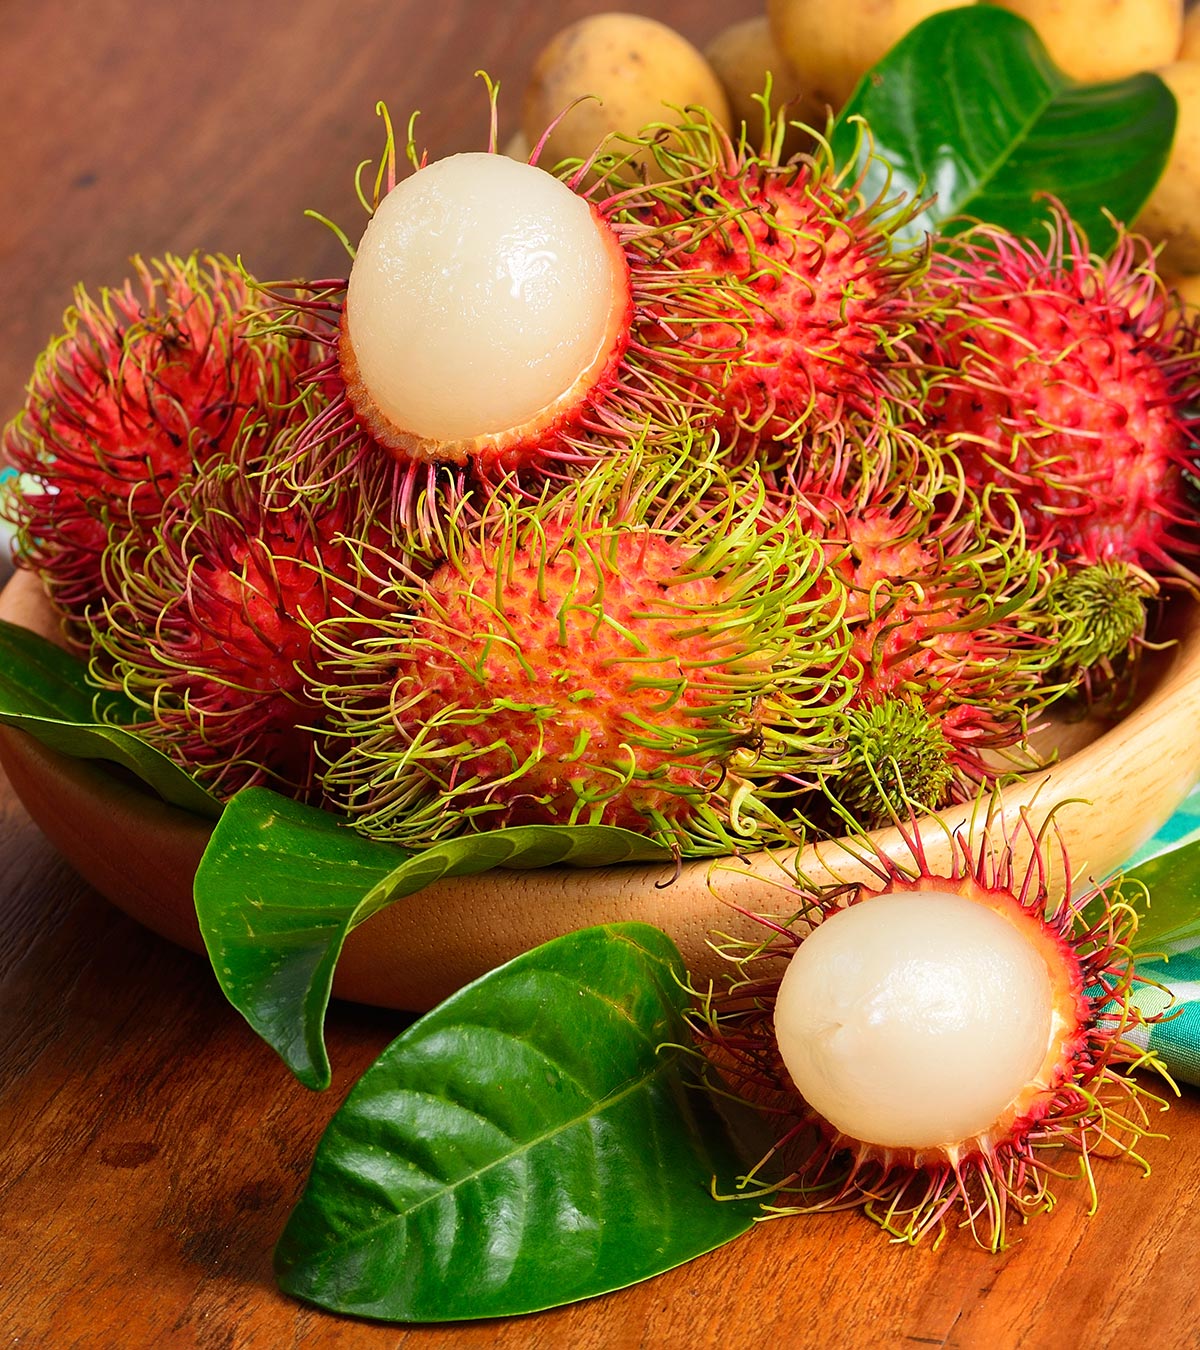 Rambutan During Pregnancy: Safety, Benefits And Side Effects